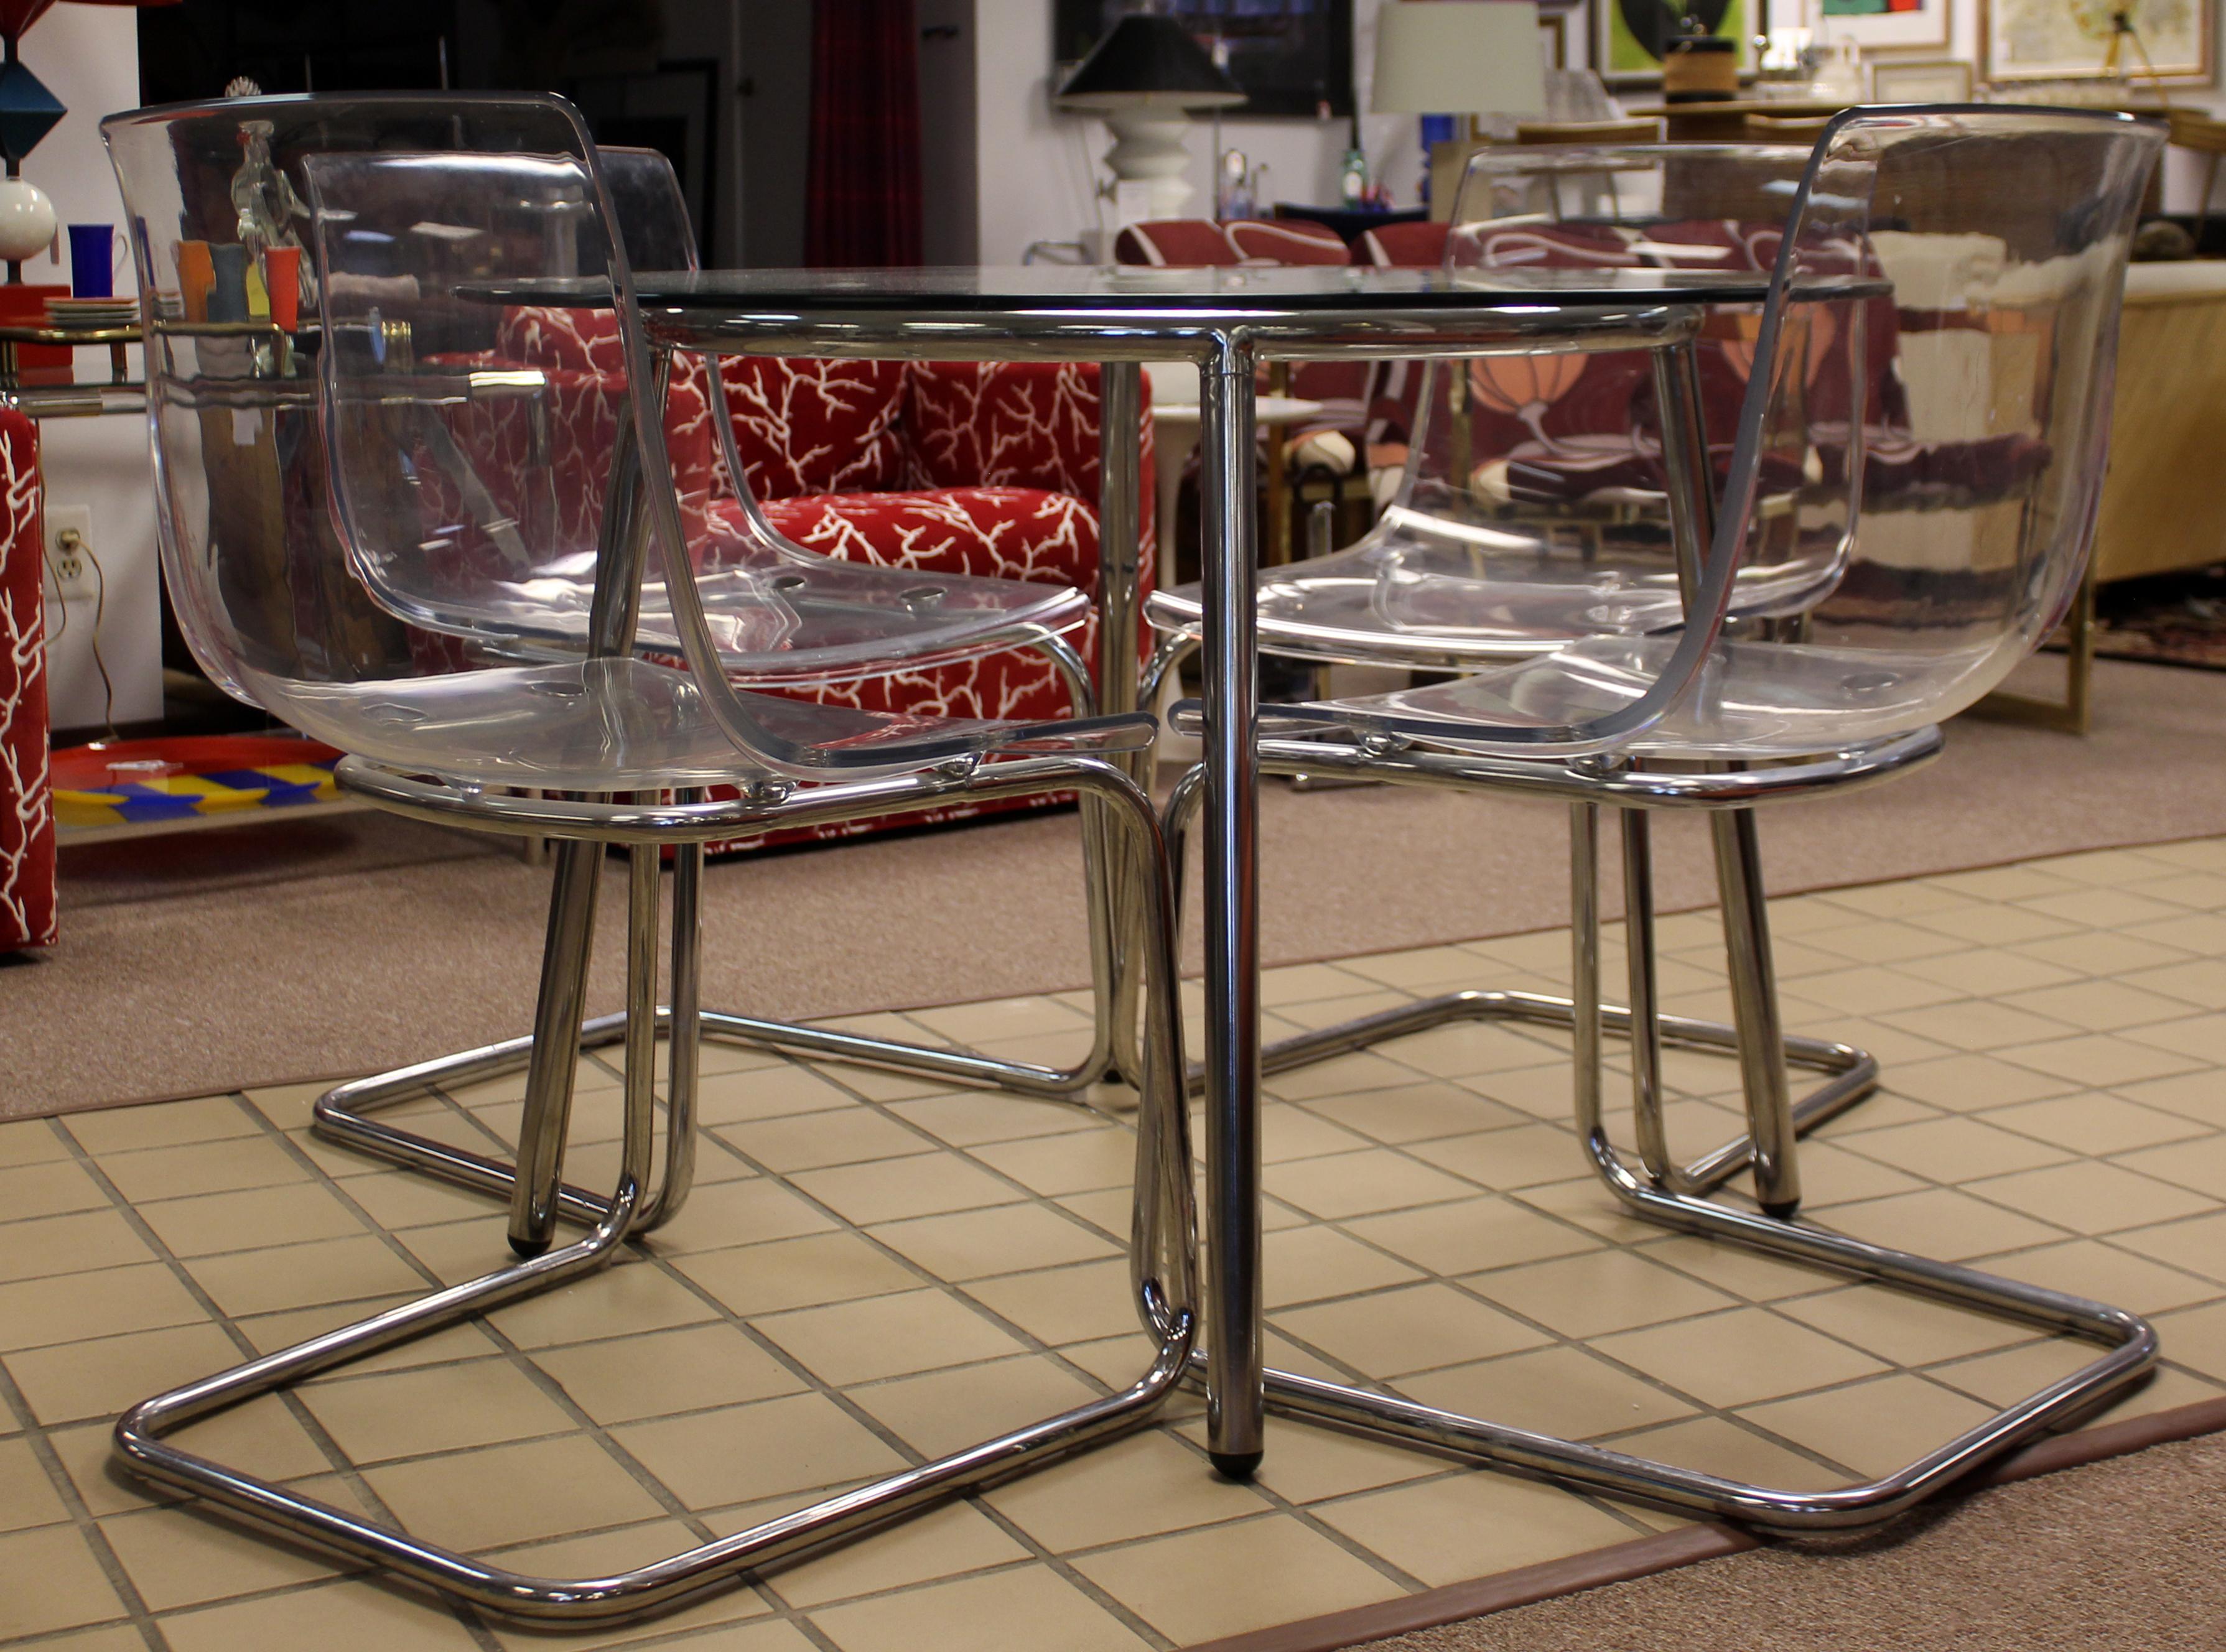 For your consideration is a fabulous dinette set, including four acrylic side dining chairs, and a round glass top and chrome table, circa 1970s. In excellent vintage condition. The dimensions of the table are 41